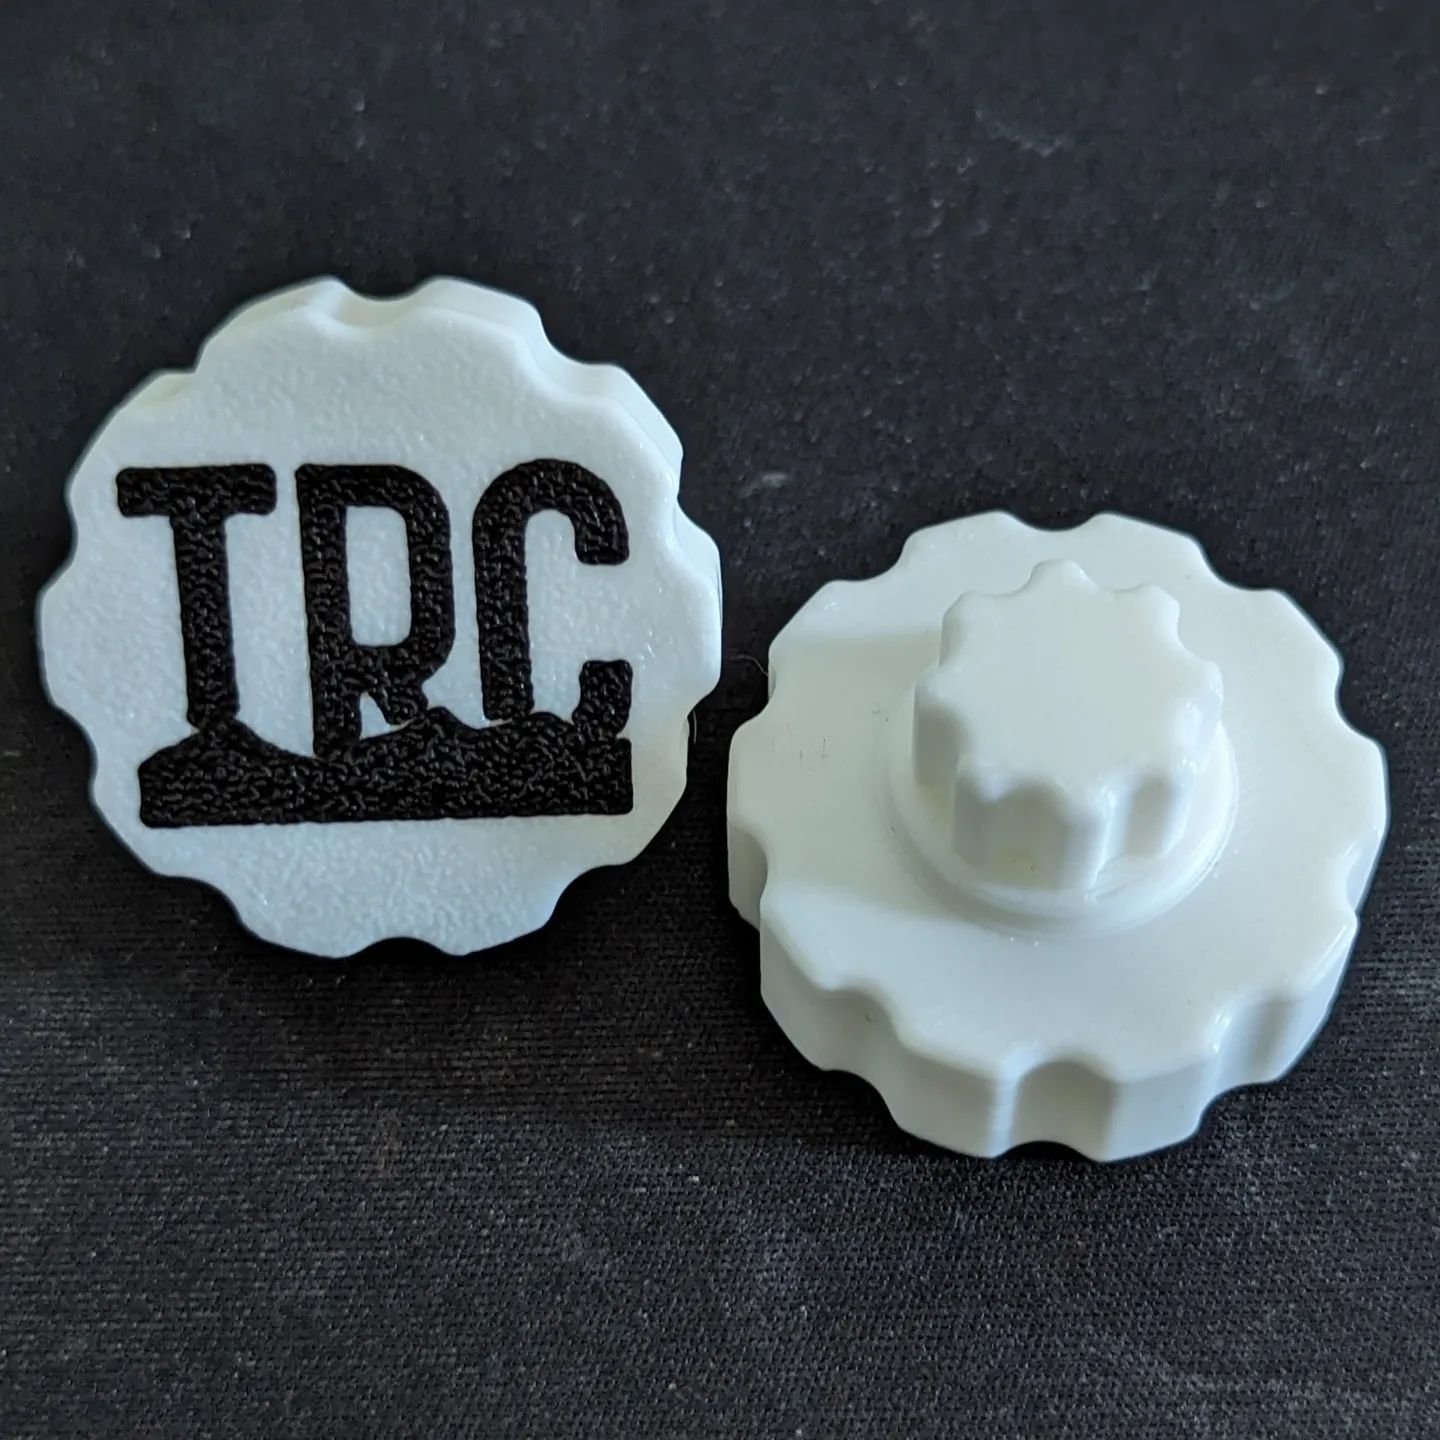 These were a popular freebie this weekend! Shimano crank cap preload tools are now up on the website to download for free and print at home!

#threerockcomponents #trc 
#shimano #tools #3dprinting #mtb #mtbtools #moutainbiking #bikes #bikeparts #moun